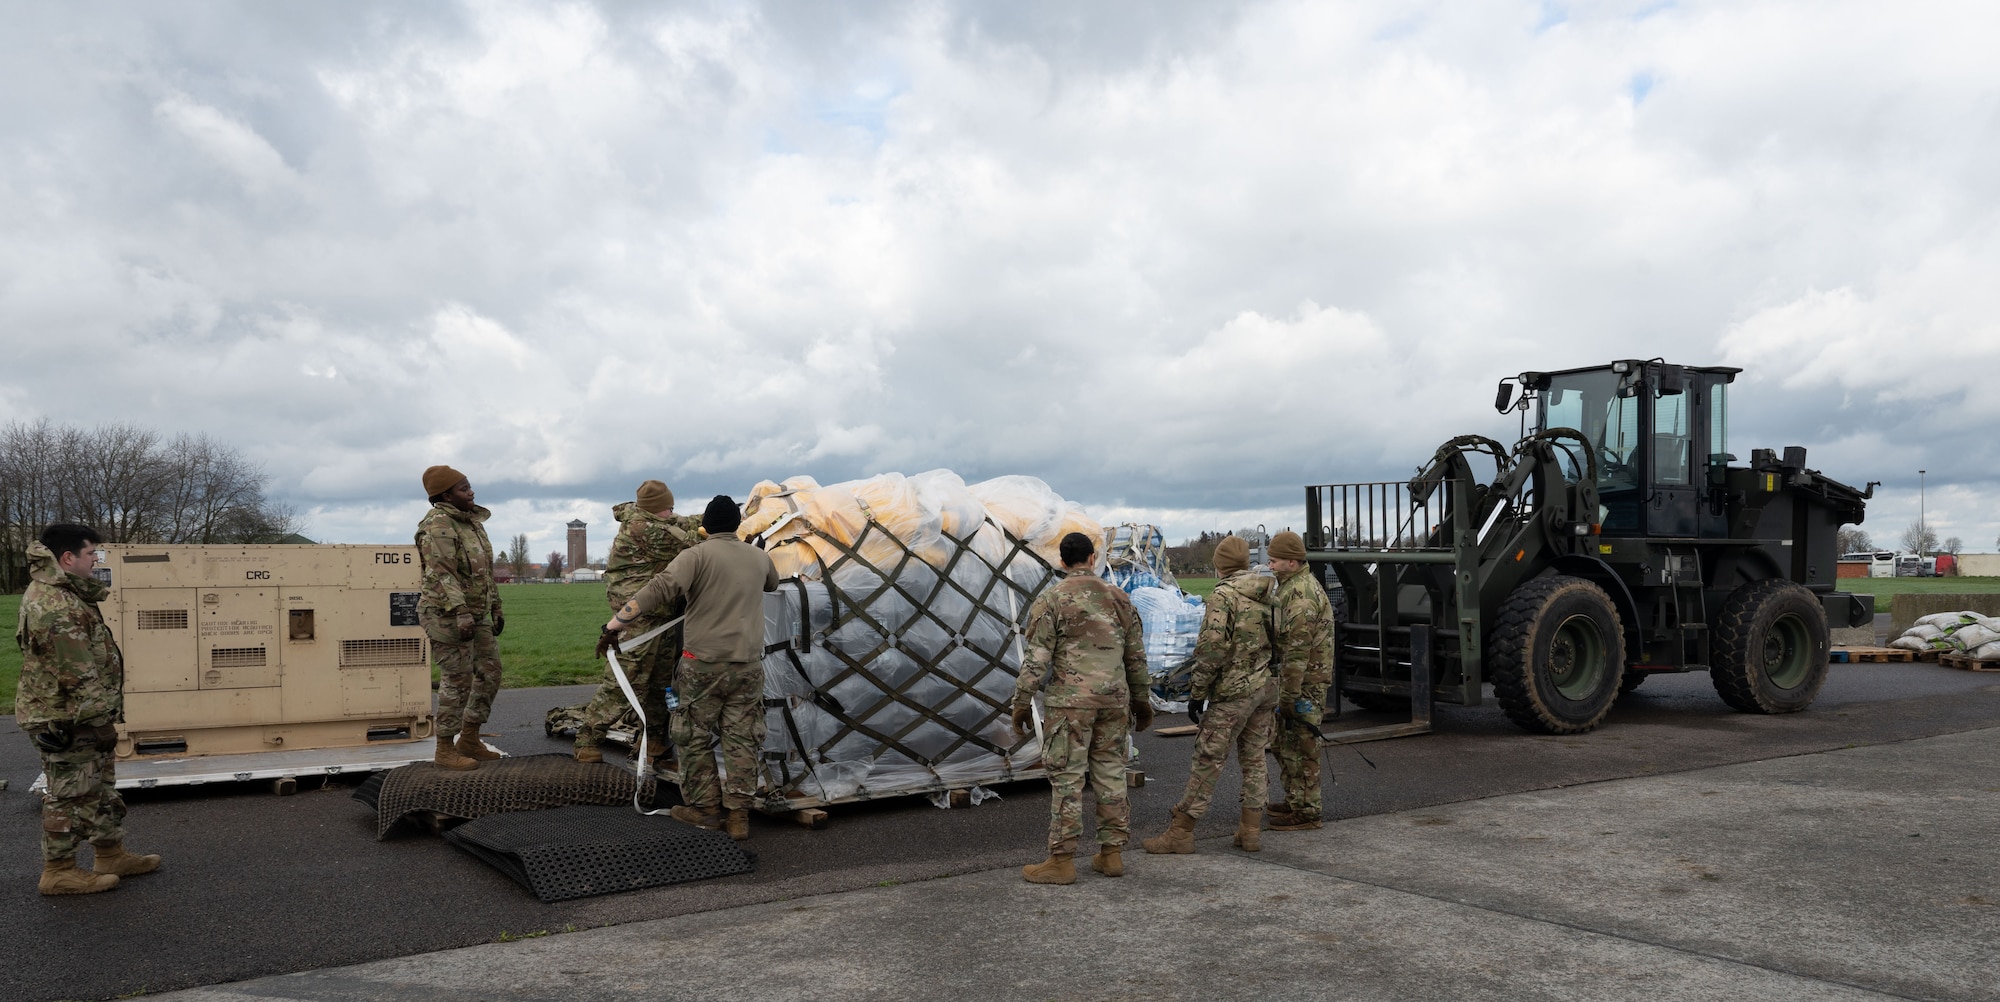 Members of the 435th Contingency Response Group palletize equipment prior to their redeployment to Ramstein Air Base Germany, during Exercise Agile Bison at Chièvres Air Base, Belgium, March 13, 2023.